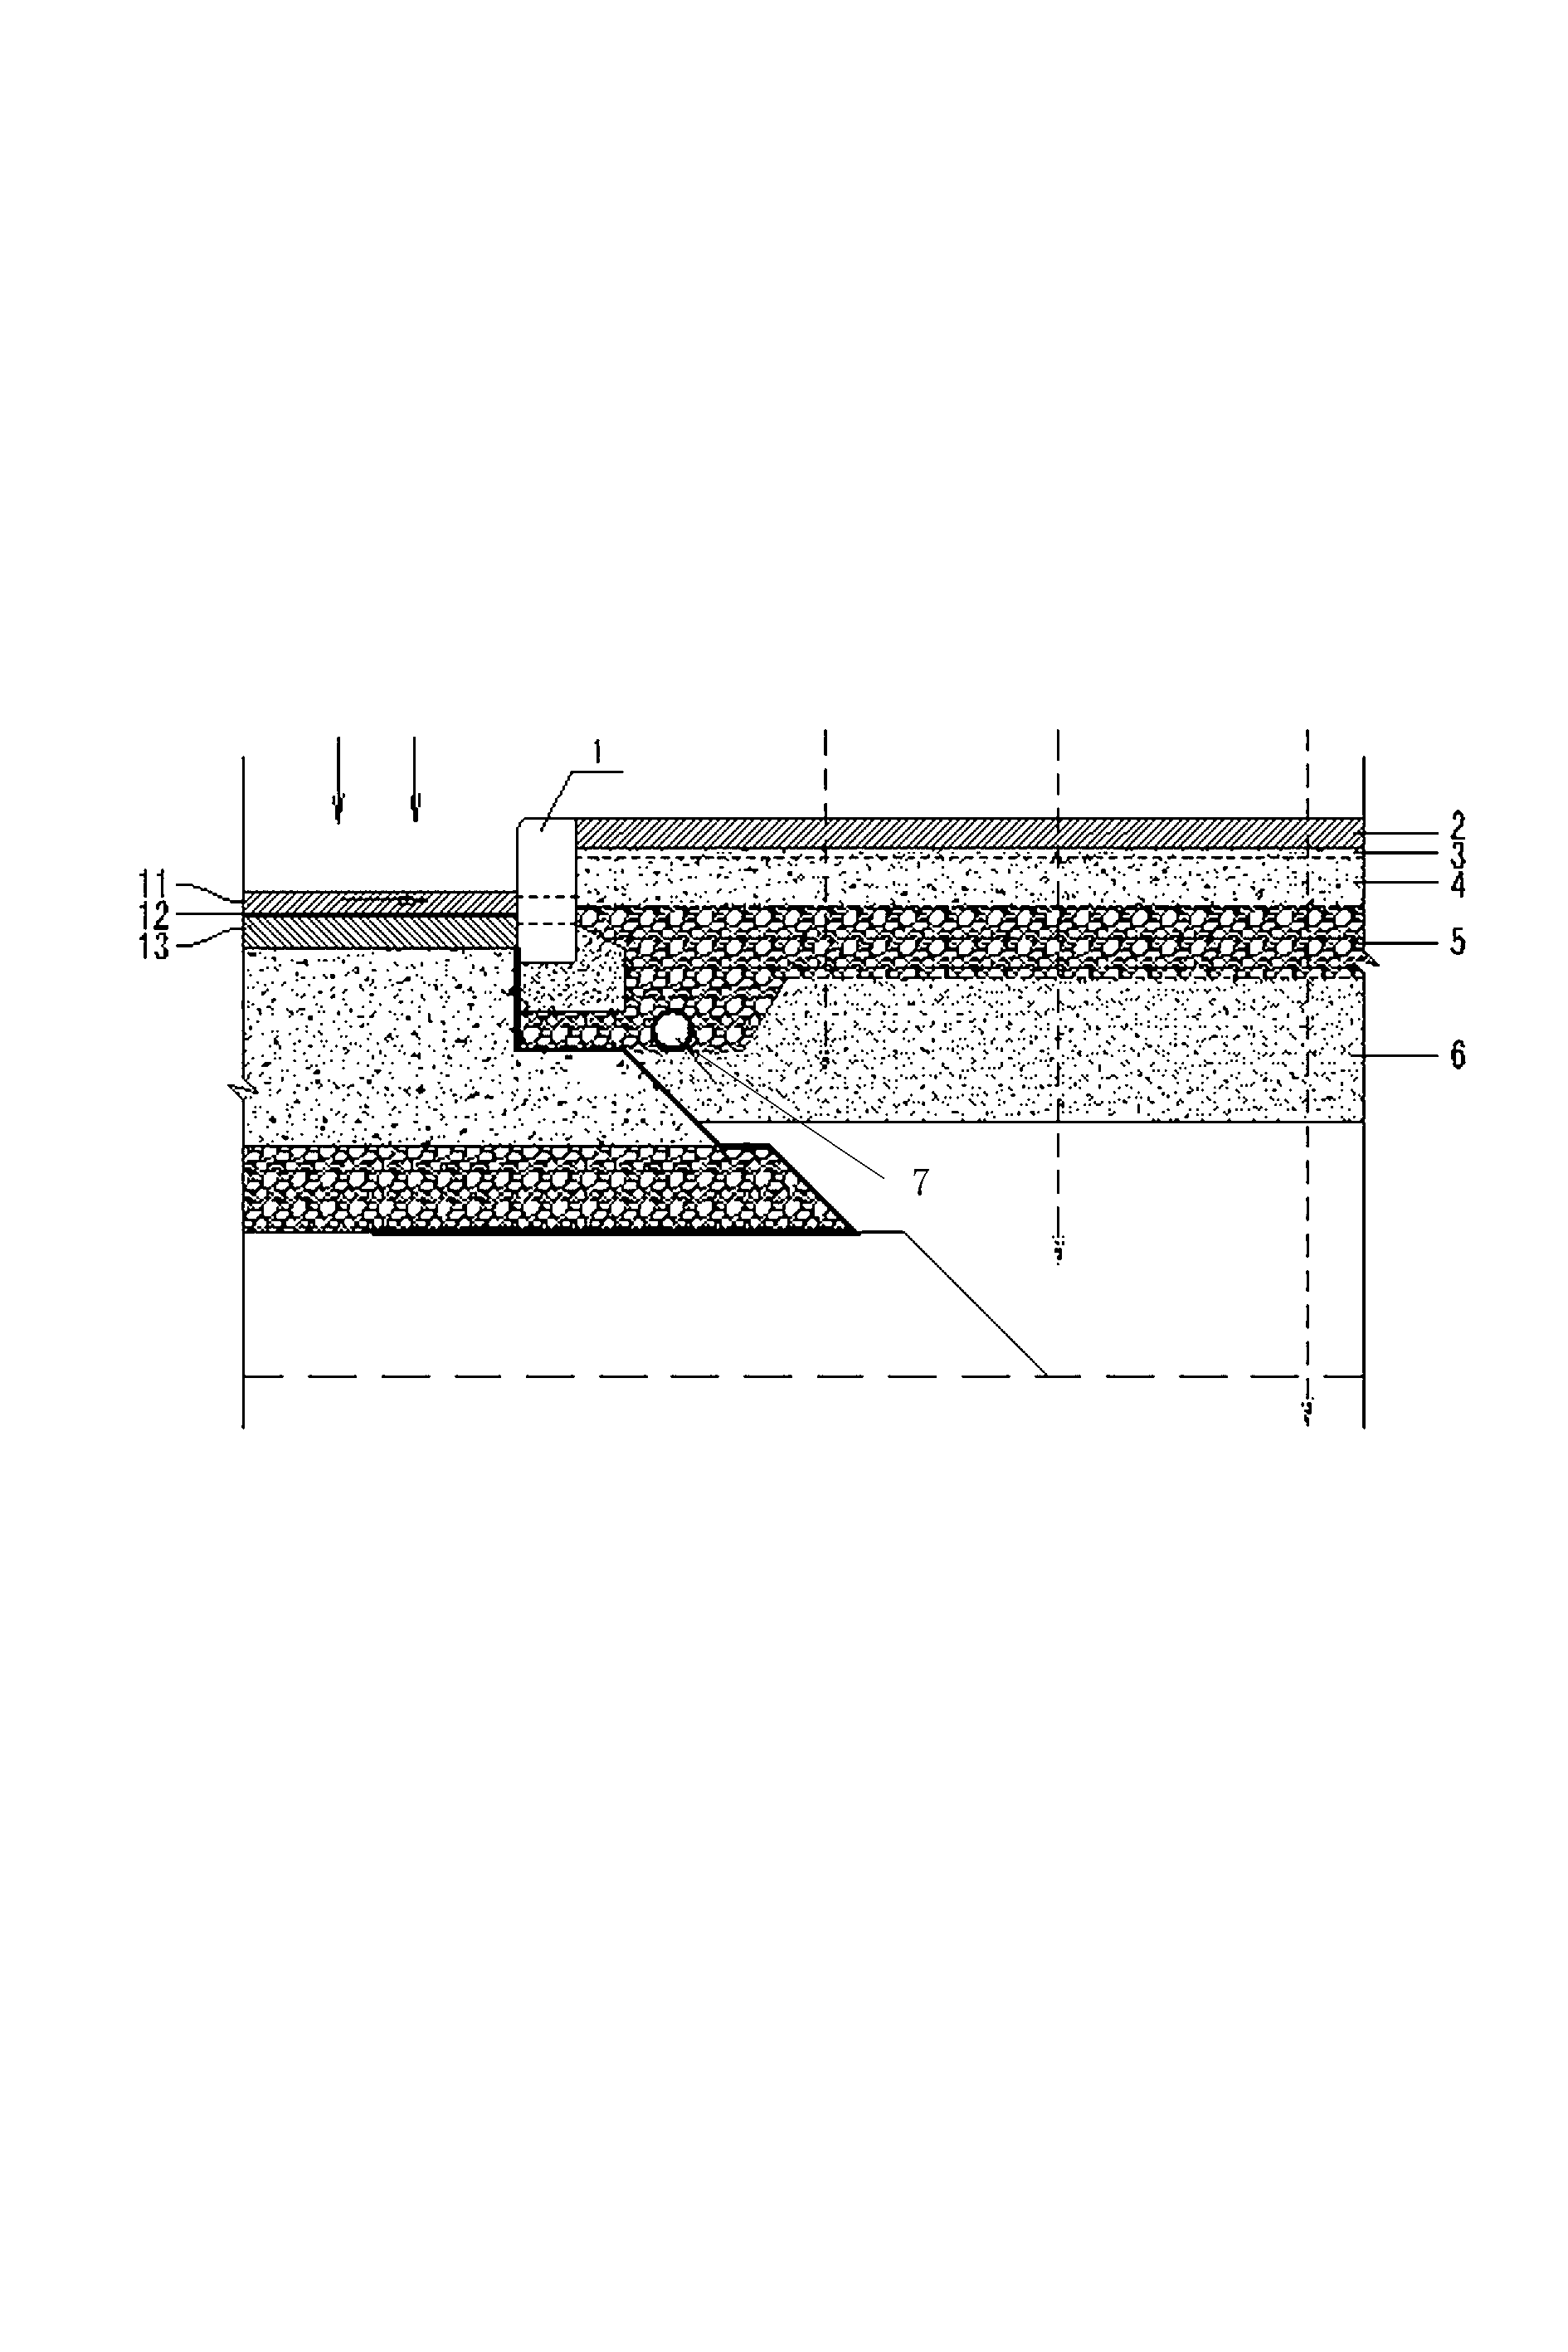 Road pavement draining method and drainage structure system